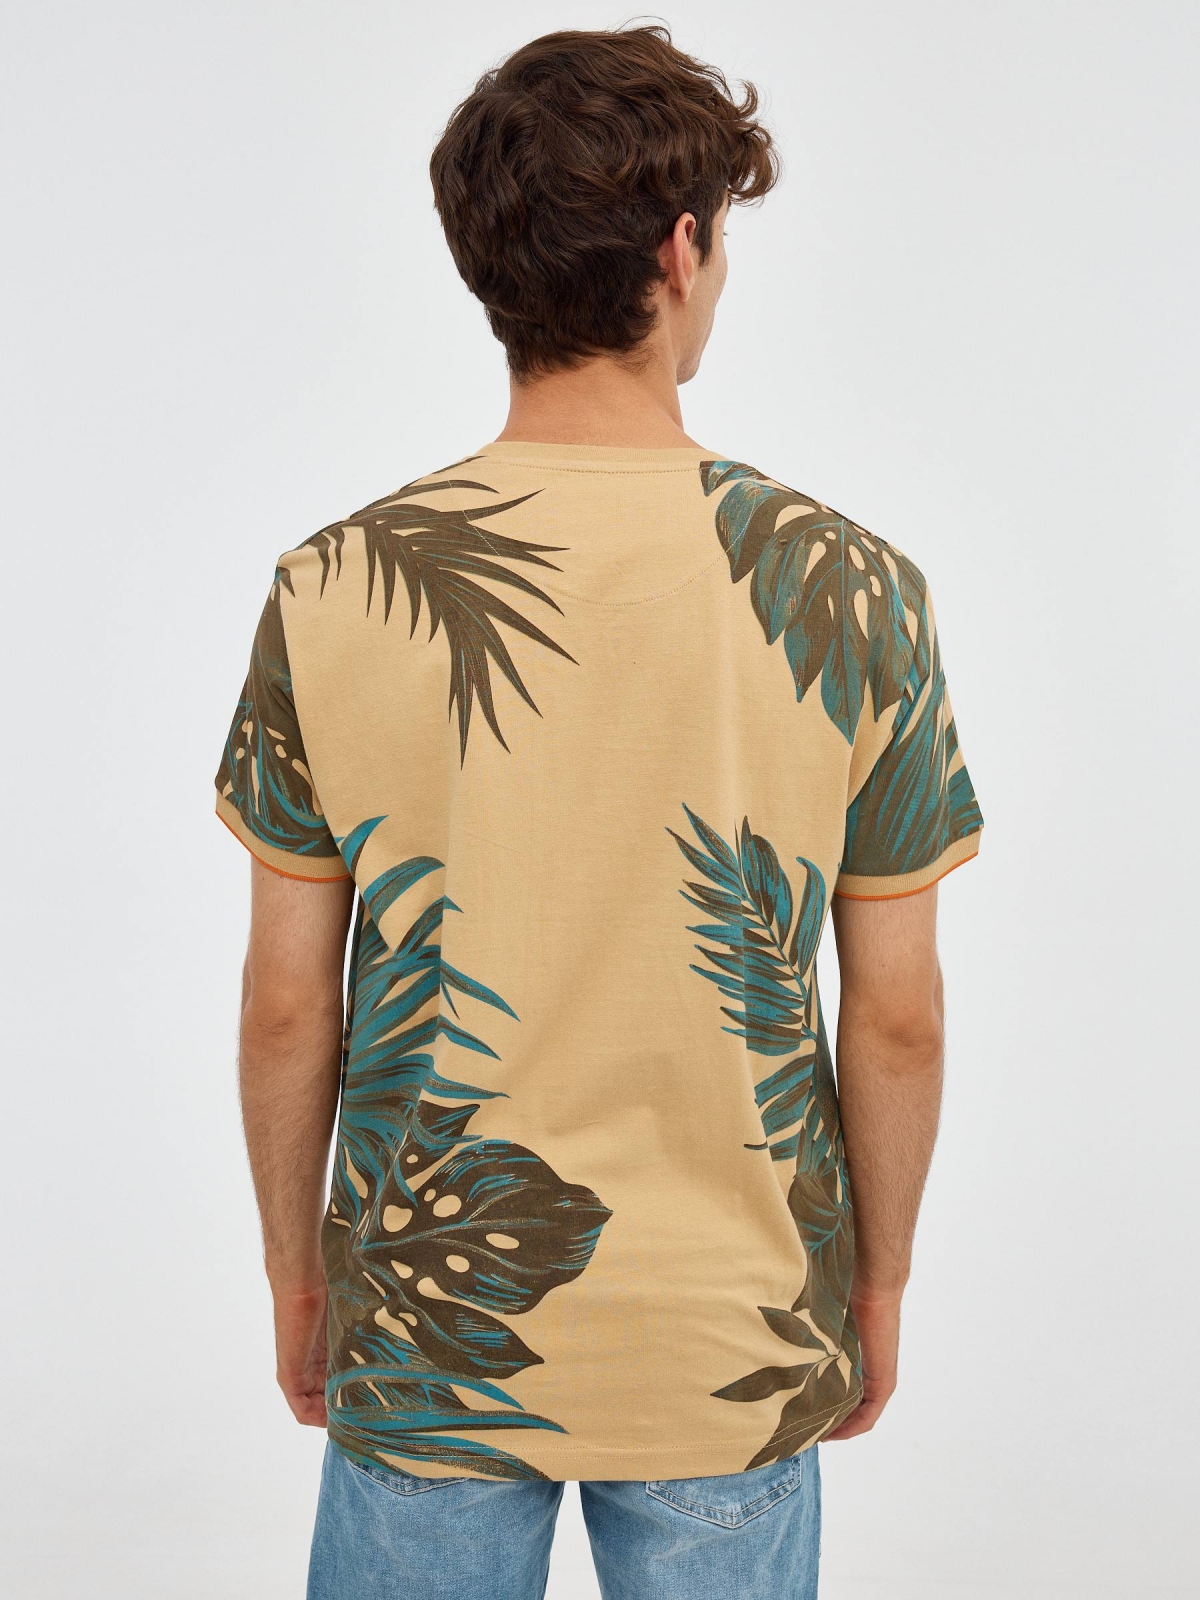 Tropical leaves t-shirt earth brown middle back view